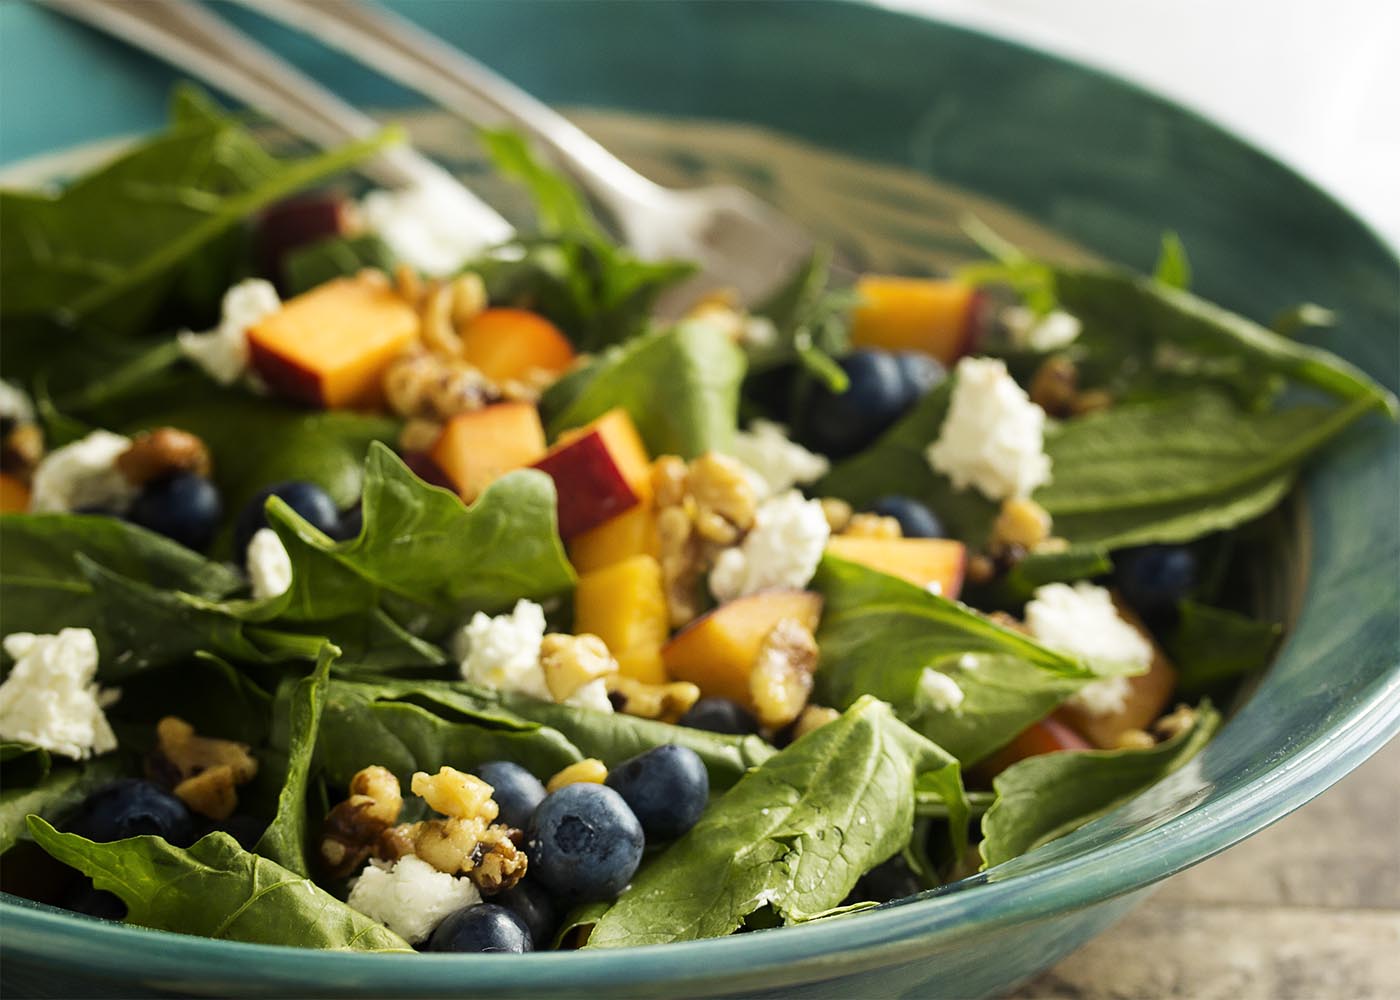 Punch up your spinach salad with seasonal summer fruits, creamy cheese, and glazed walnuts in this peach and blueberry spinach salad. | justalittlebitofbacon.com